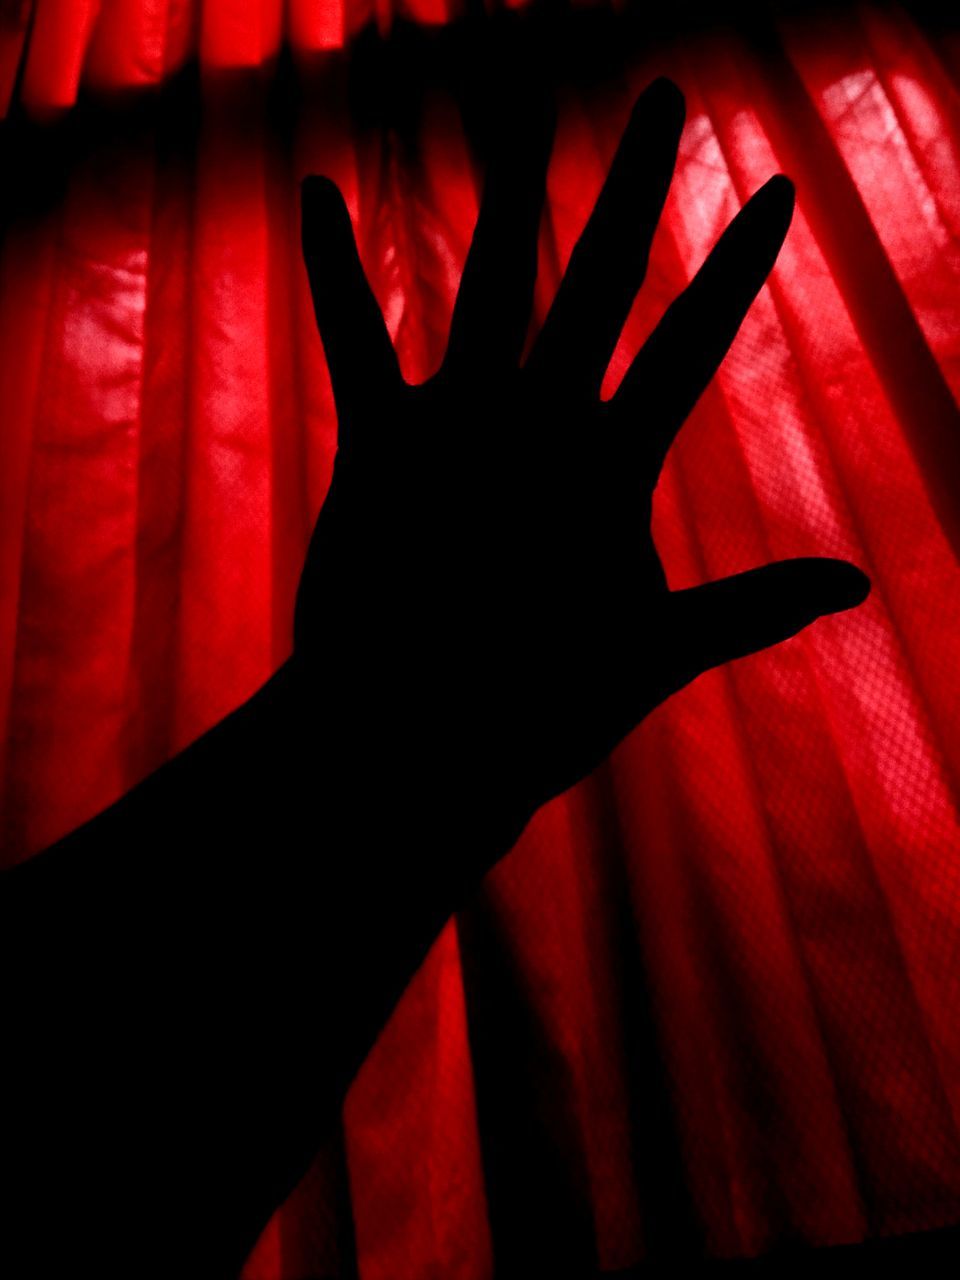 CLOSE-UP OF PERSON HAND WITH RED LIGHT